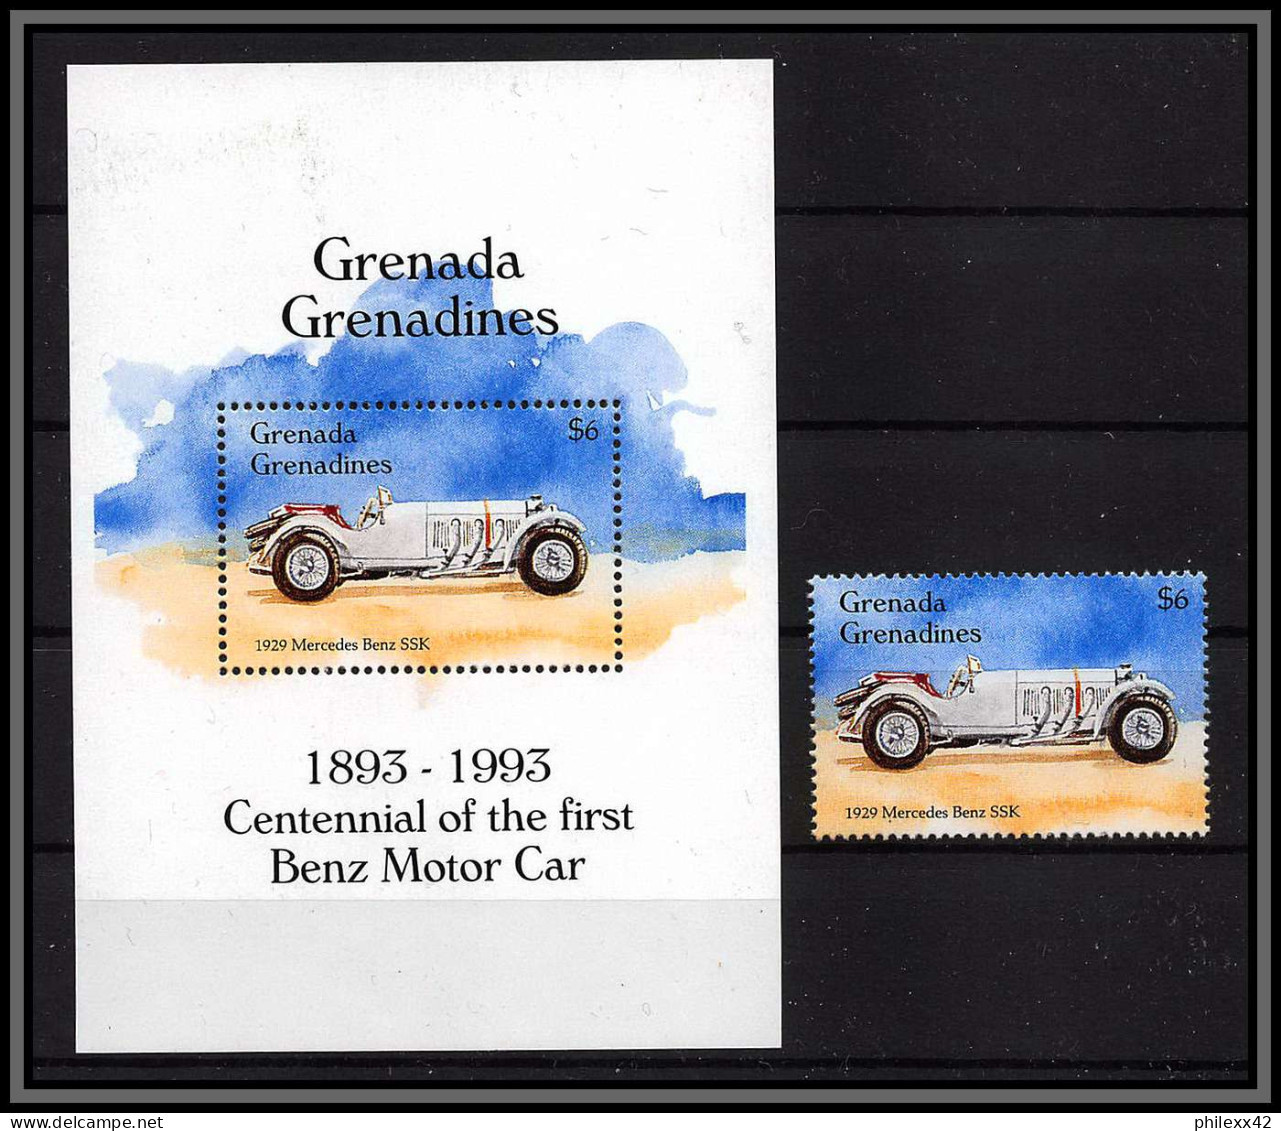 81504a Grenada Grenadines Y&t 294 100th Anniversary Of  Ford Moto 1893/1993 TB Neuf ** MNH Voiture Voitures Cars Autos - St.Vincent Y Las Granadinas